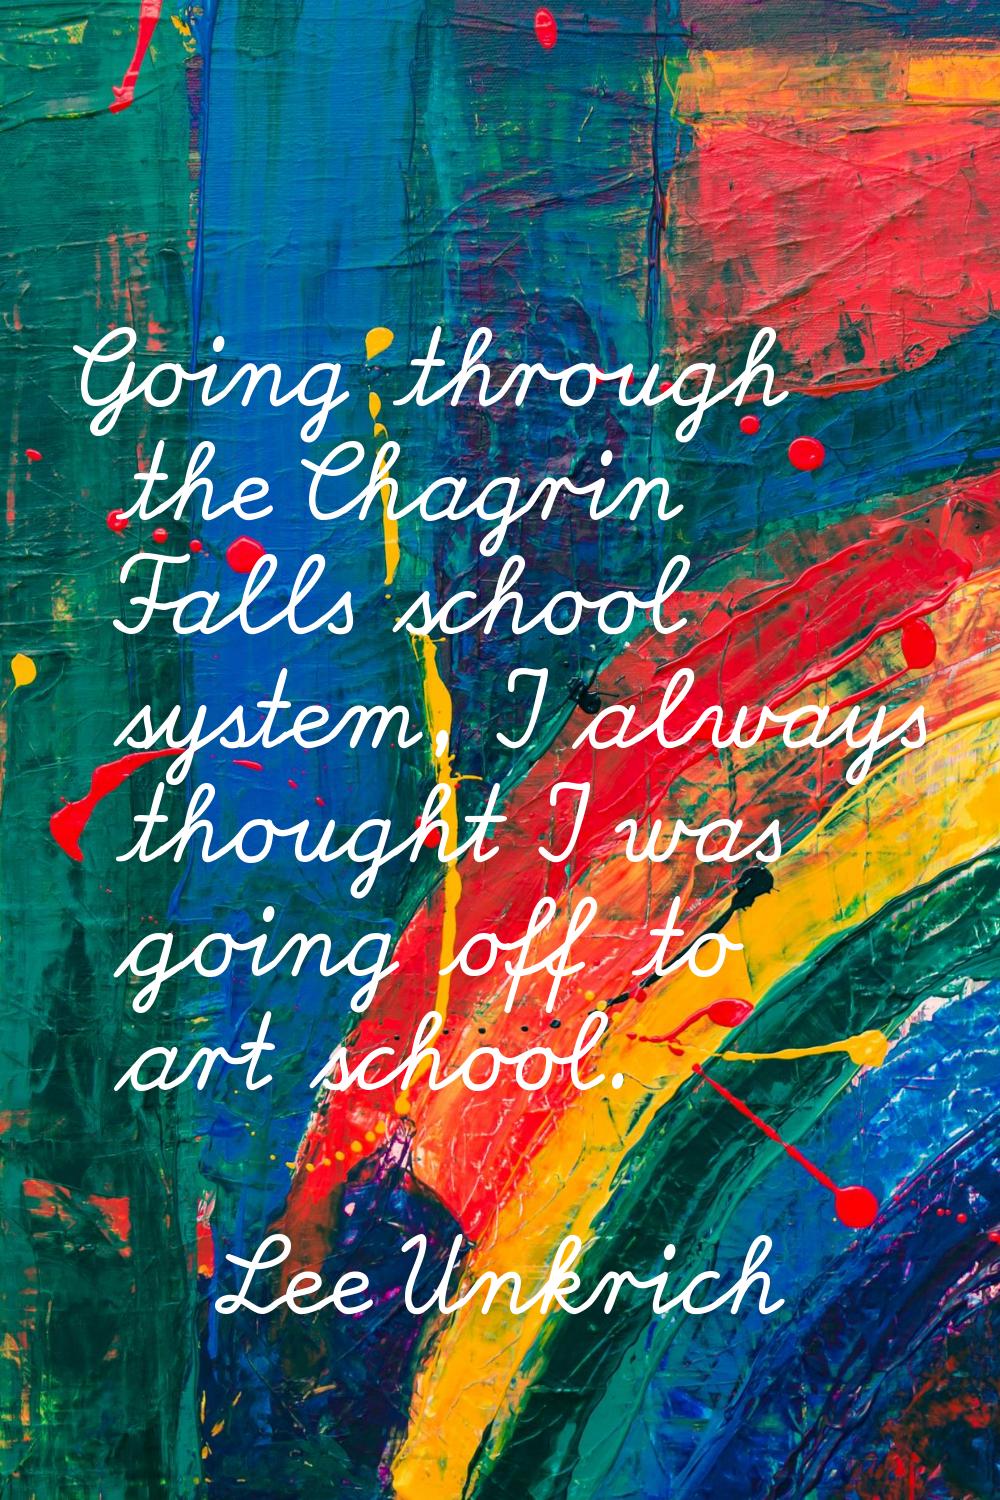 Going through the Chagrin Falls school system, I always thought I was going off to art school.